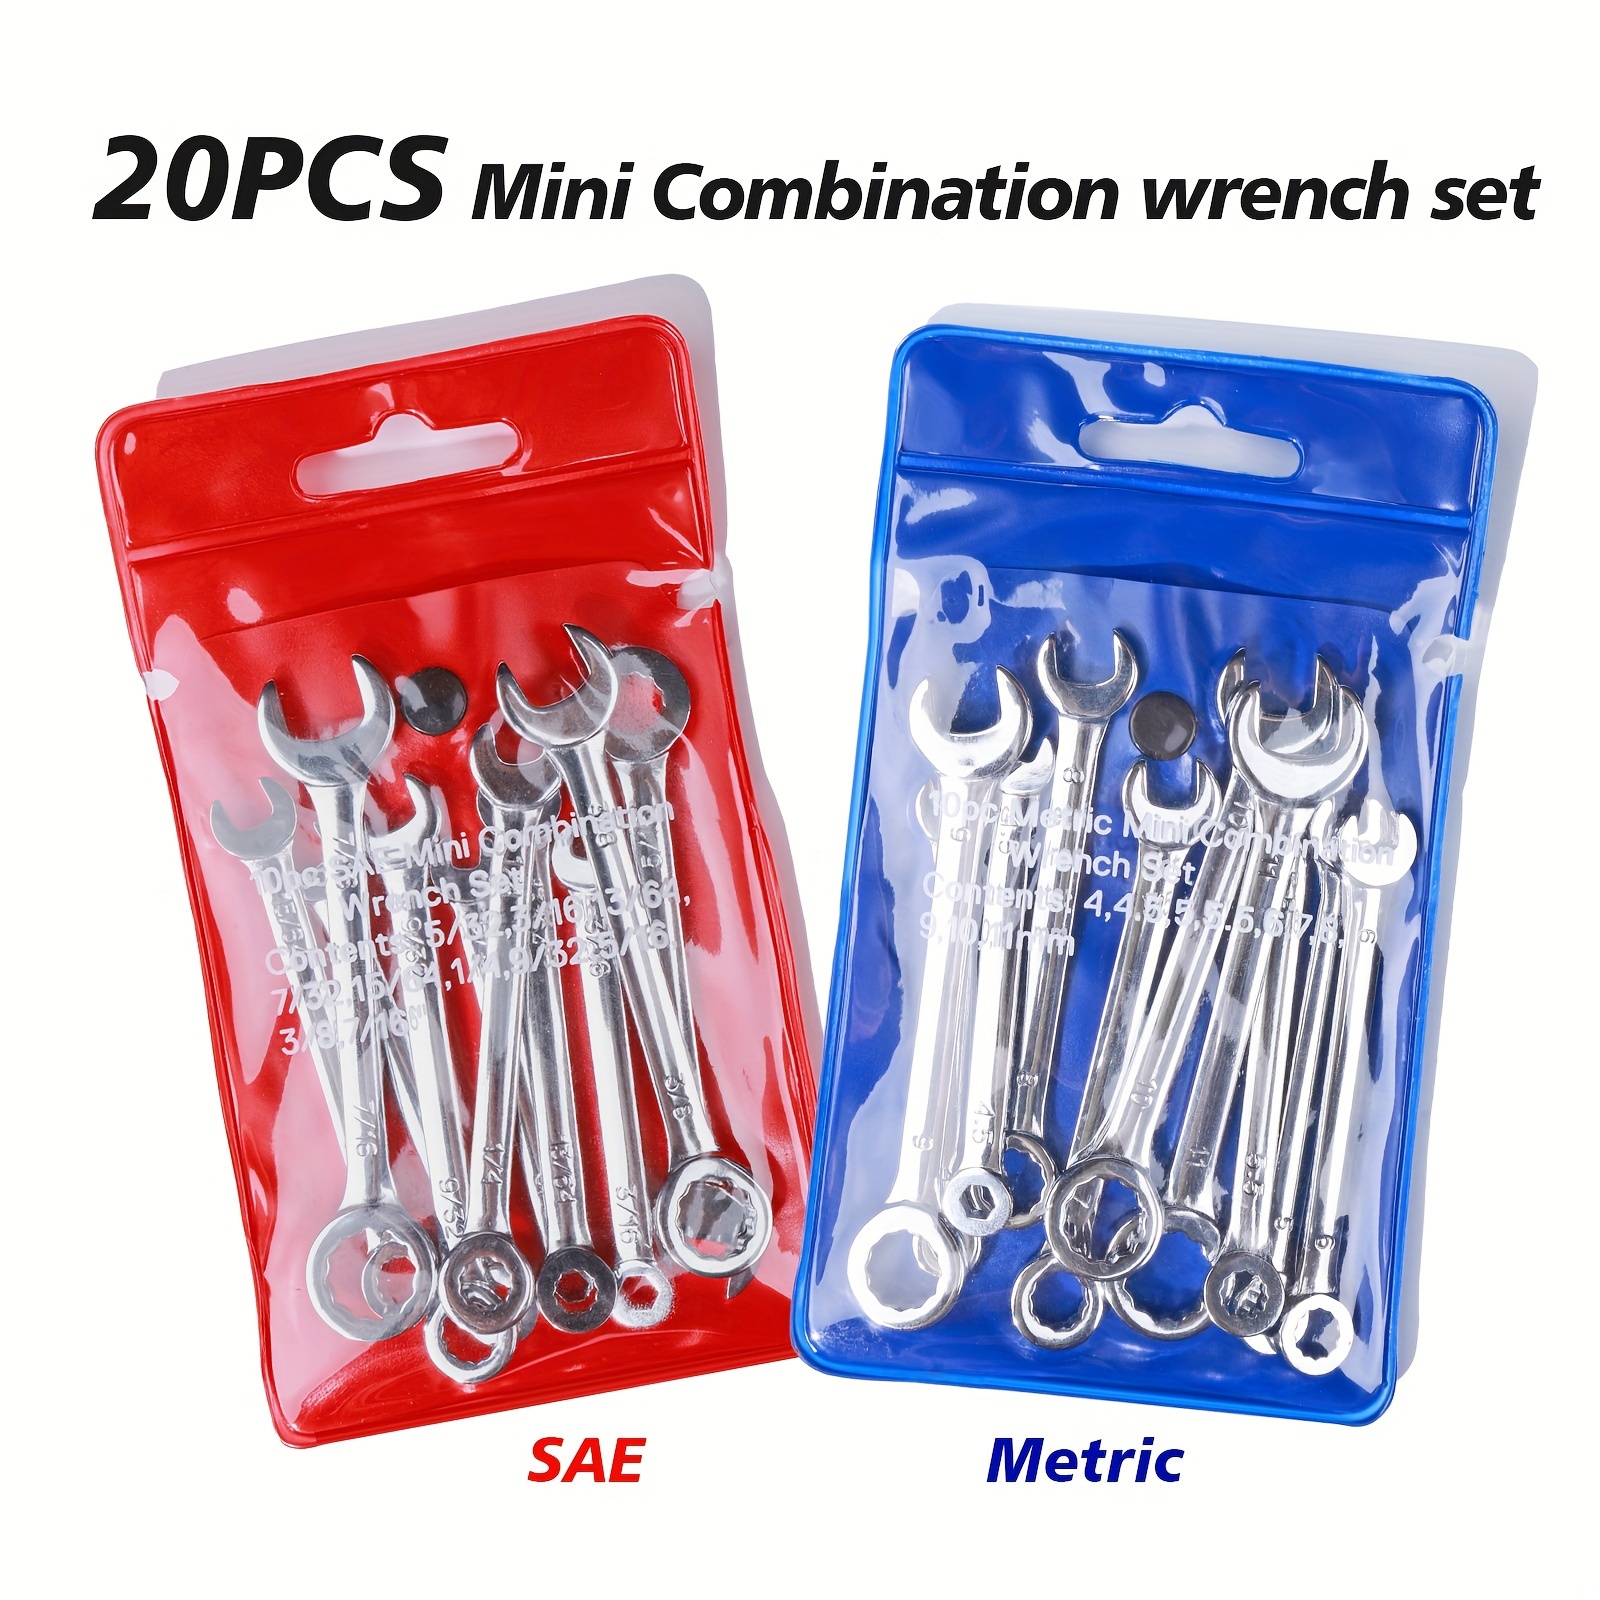 

20pcs Imperial Open & Box End Combination Mini Wrench Set